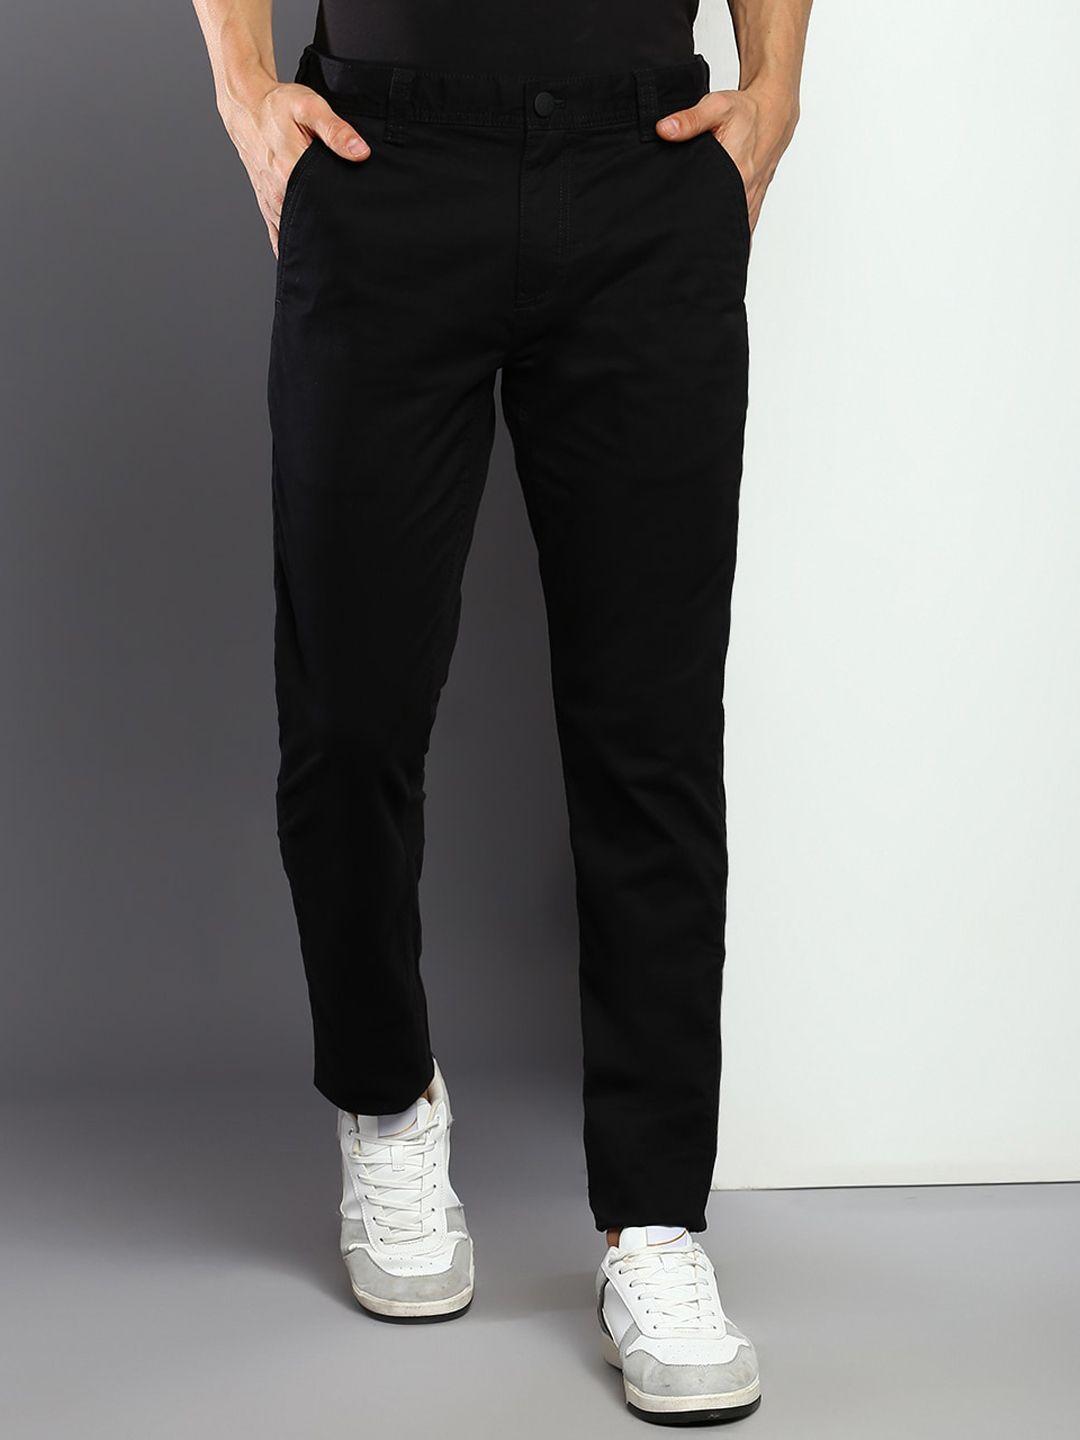 calvin-klein-jeans-men-skinny-fit-cotton-chinos-trousers